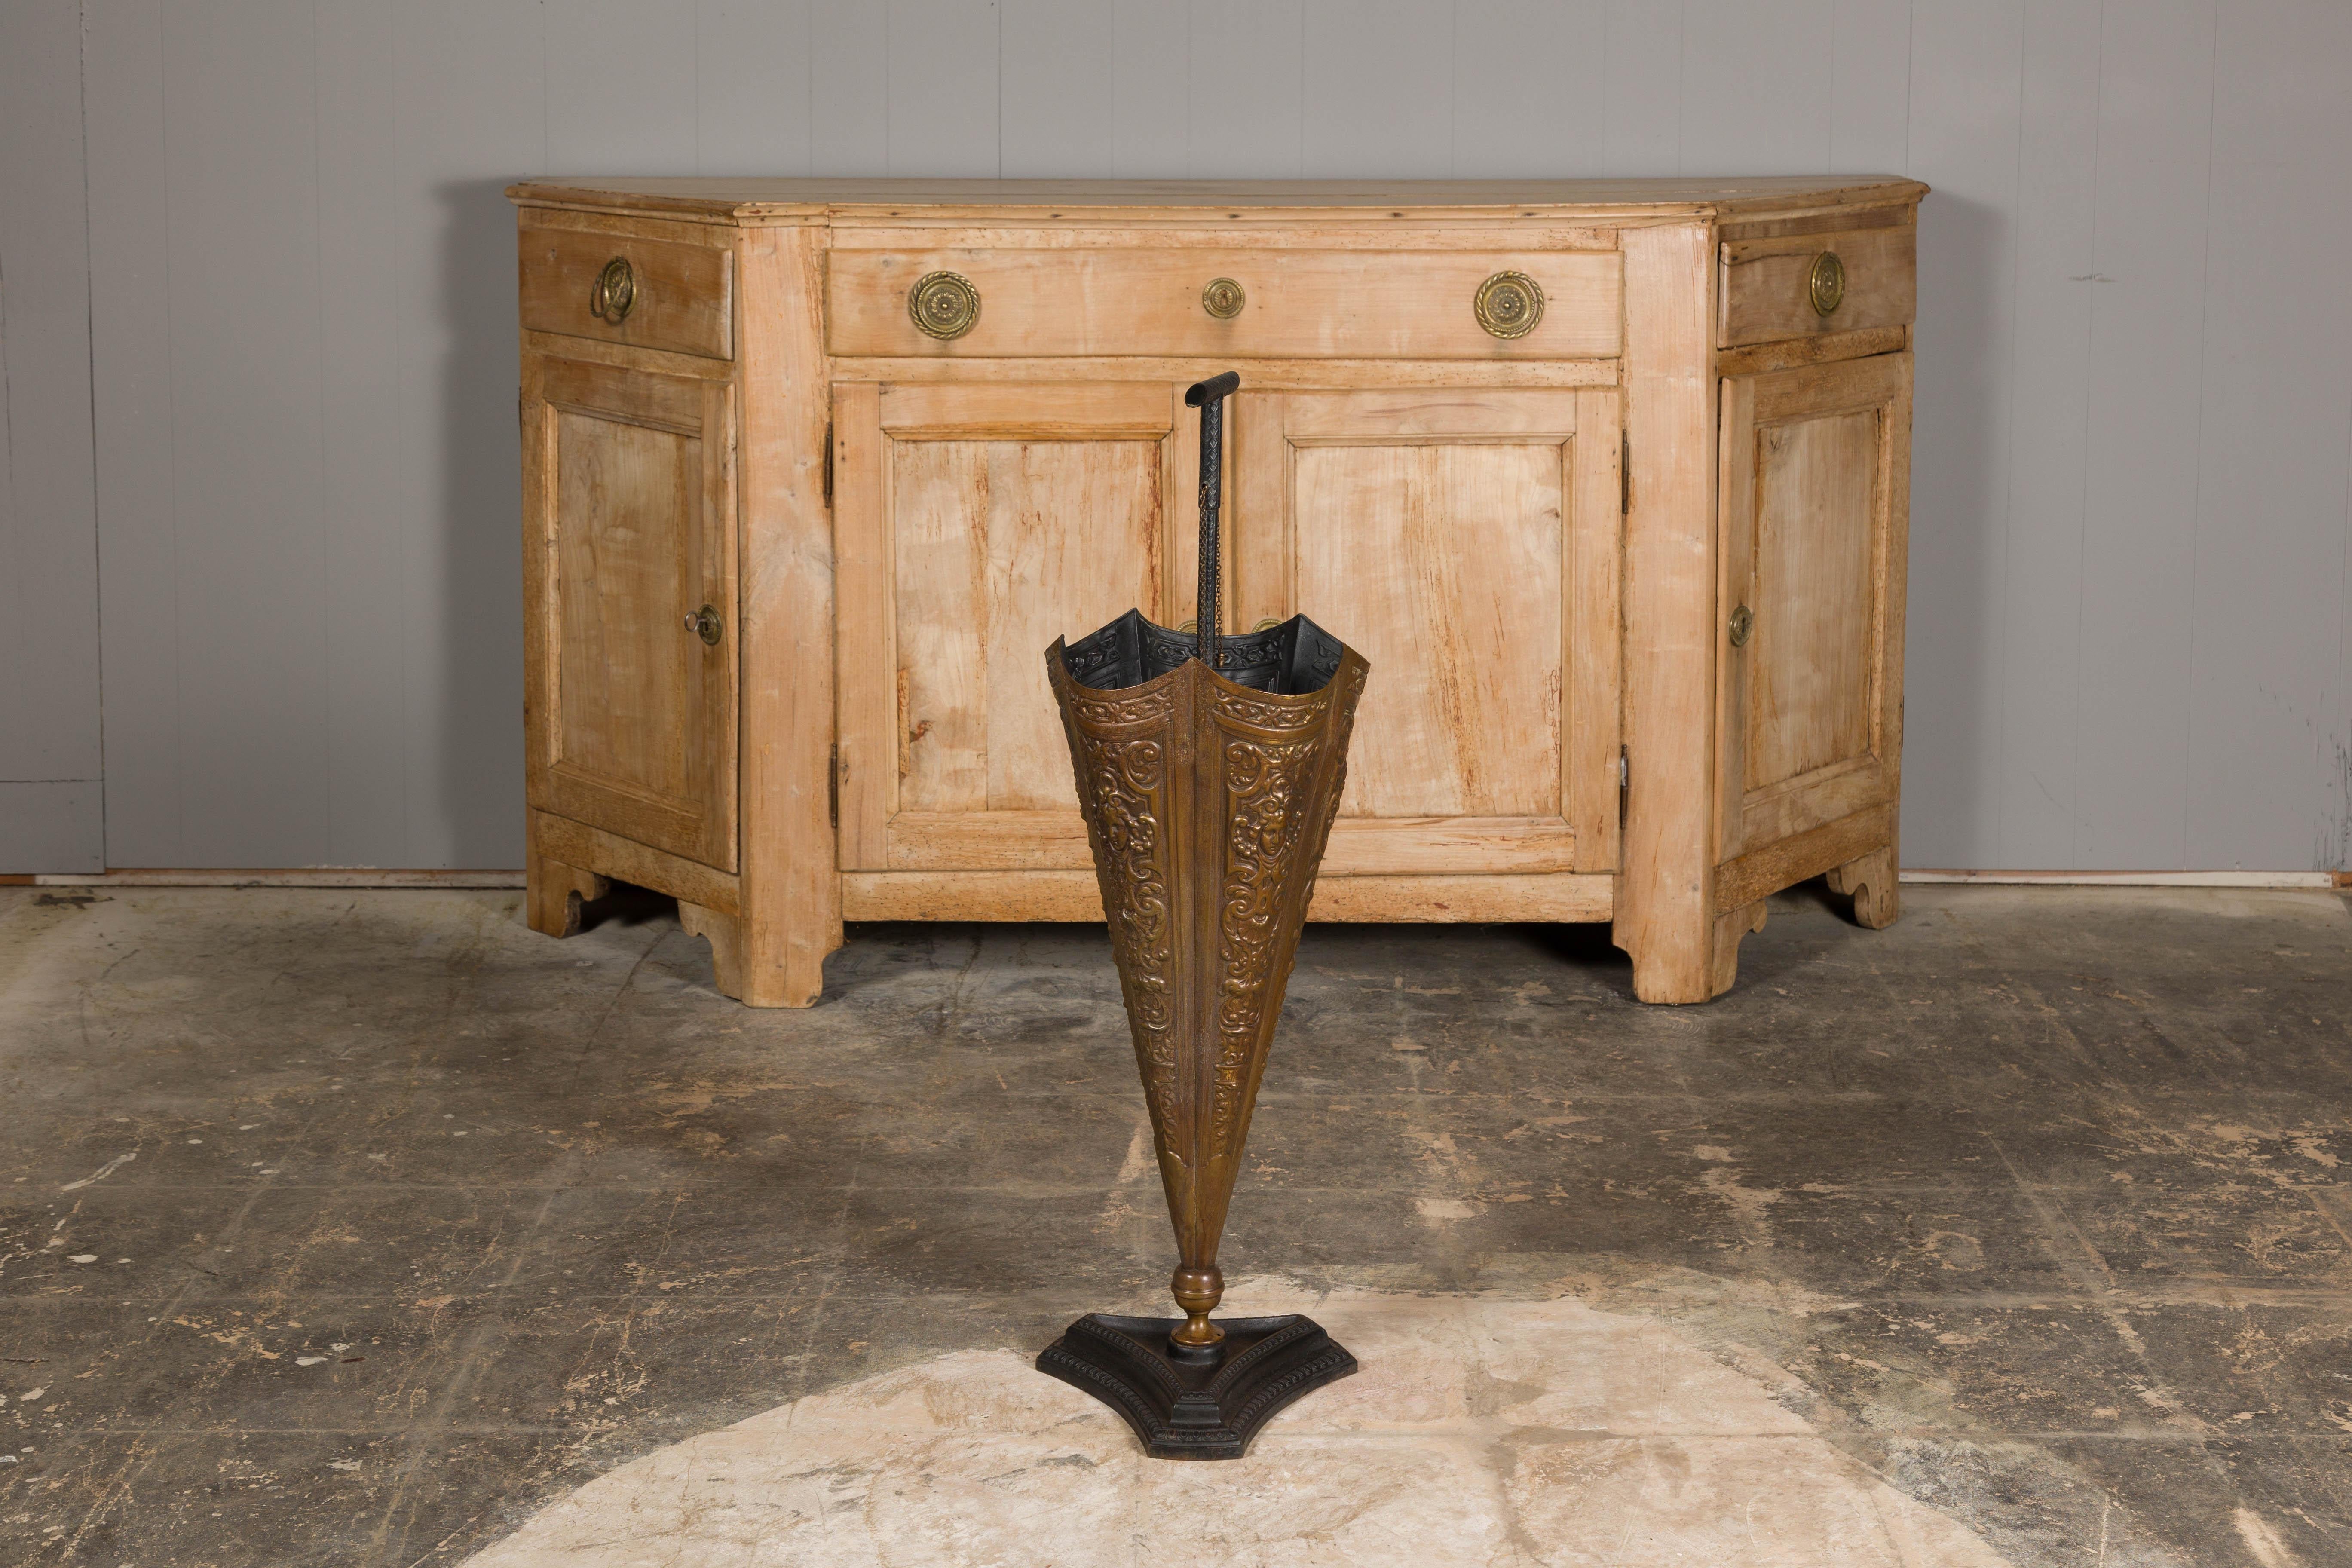 20th Century English 1920-1930 Brass Umbrella Stand with Raised Motifs and Tripartite Base For Sale